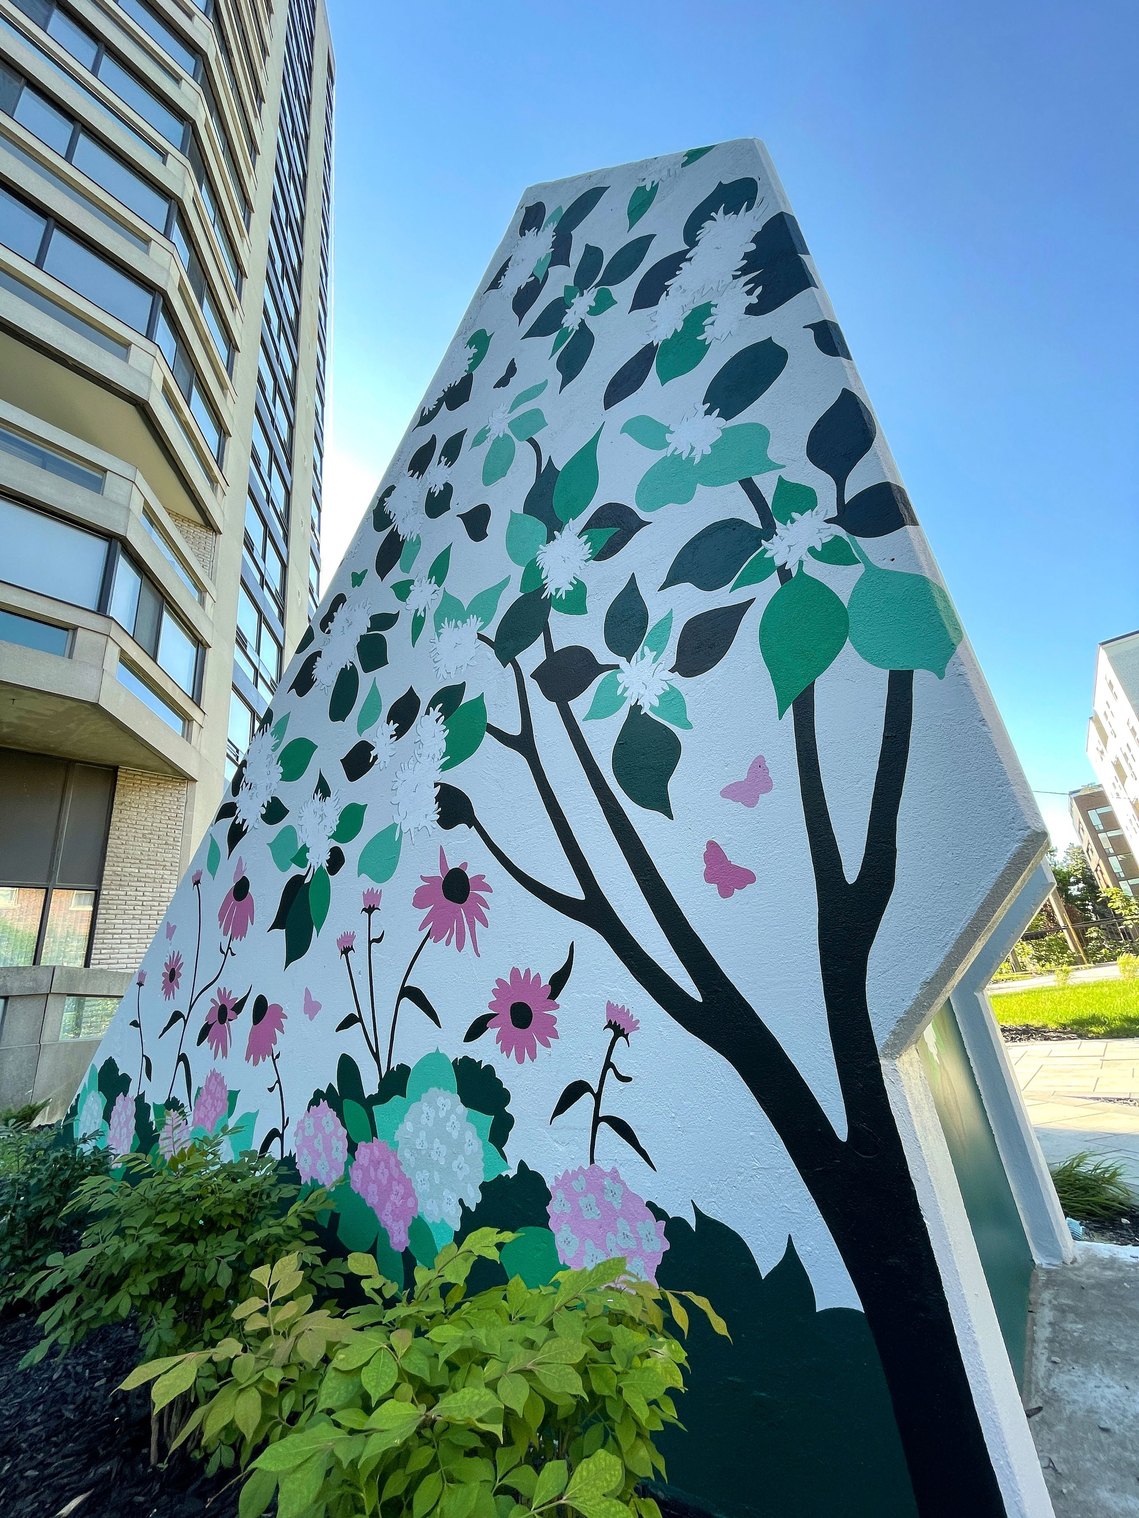 A concrete structure sits in a yard, disguised by a painted mural of plants found in the garden. A blossoming dogwood tree is the main focus with pink hydrangea and cone flowers growing around it. 